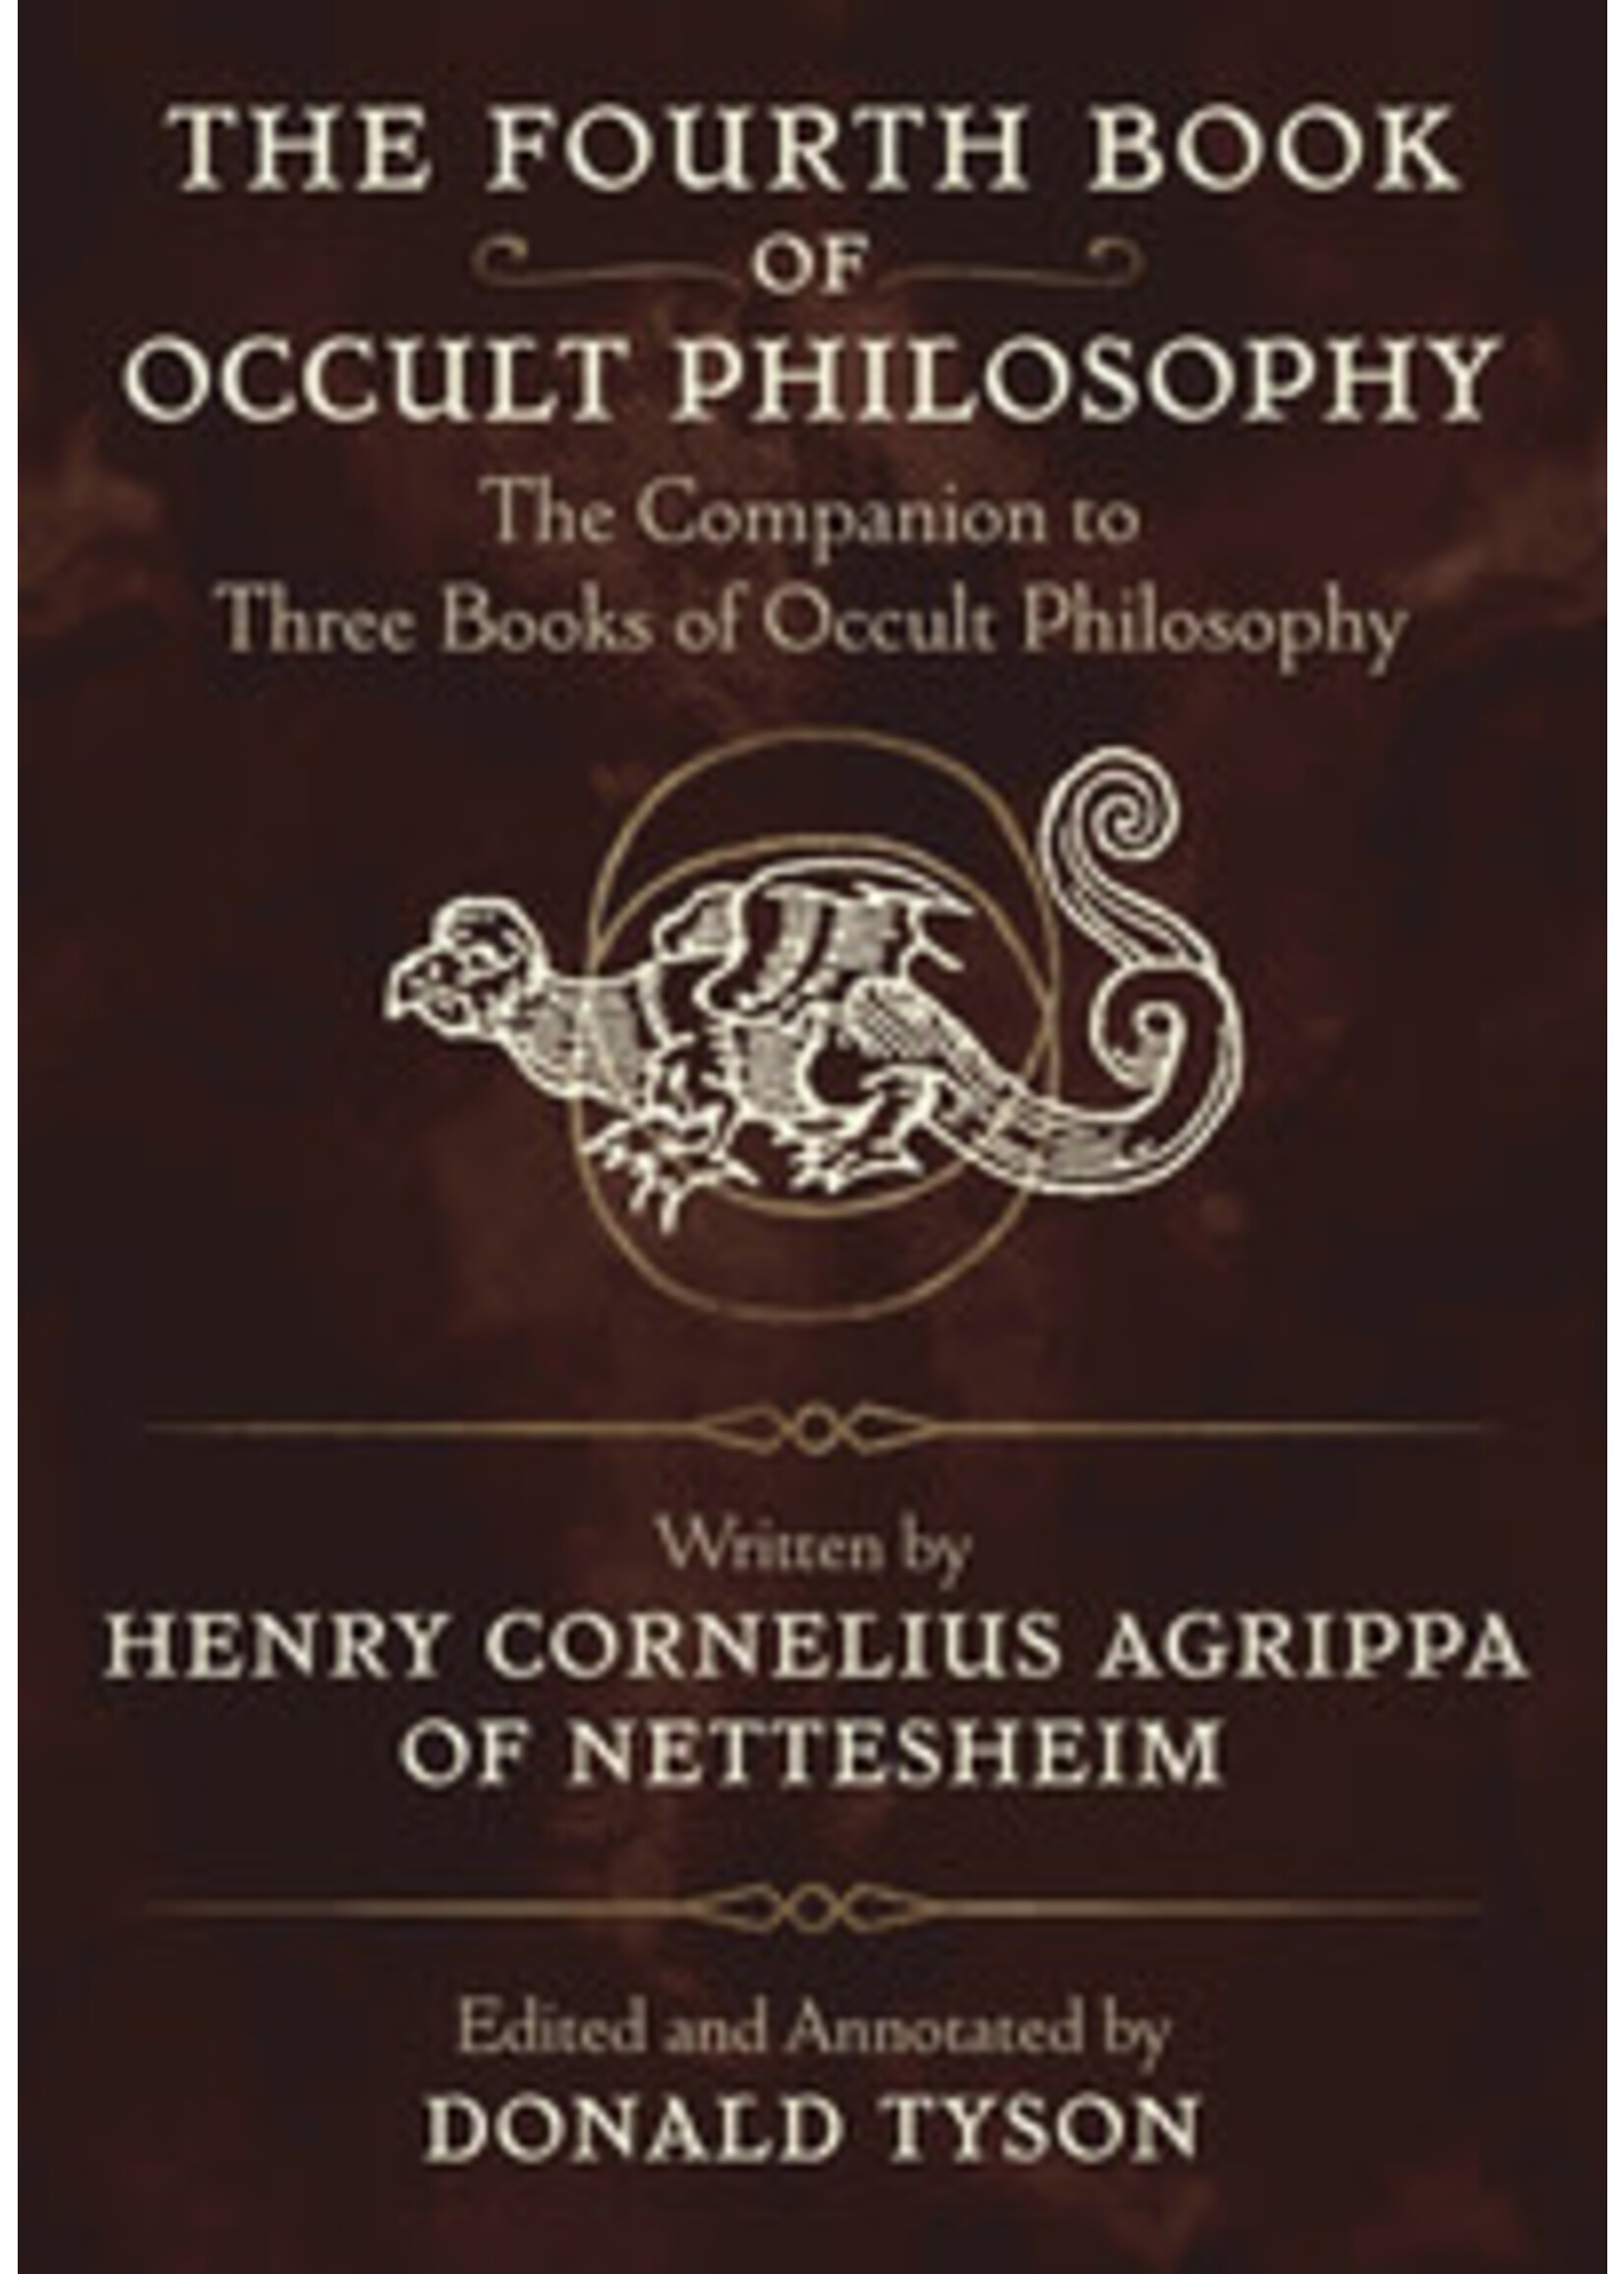 The Fourth Book of Occult Philosophy by Donald Tyson